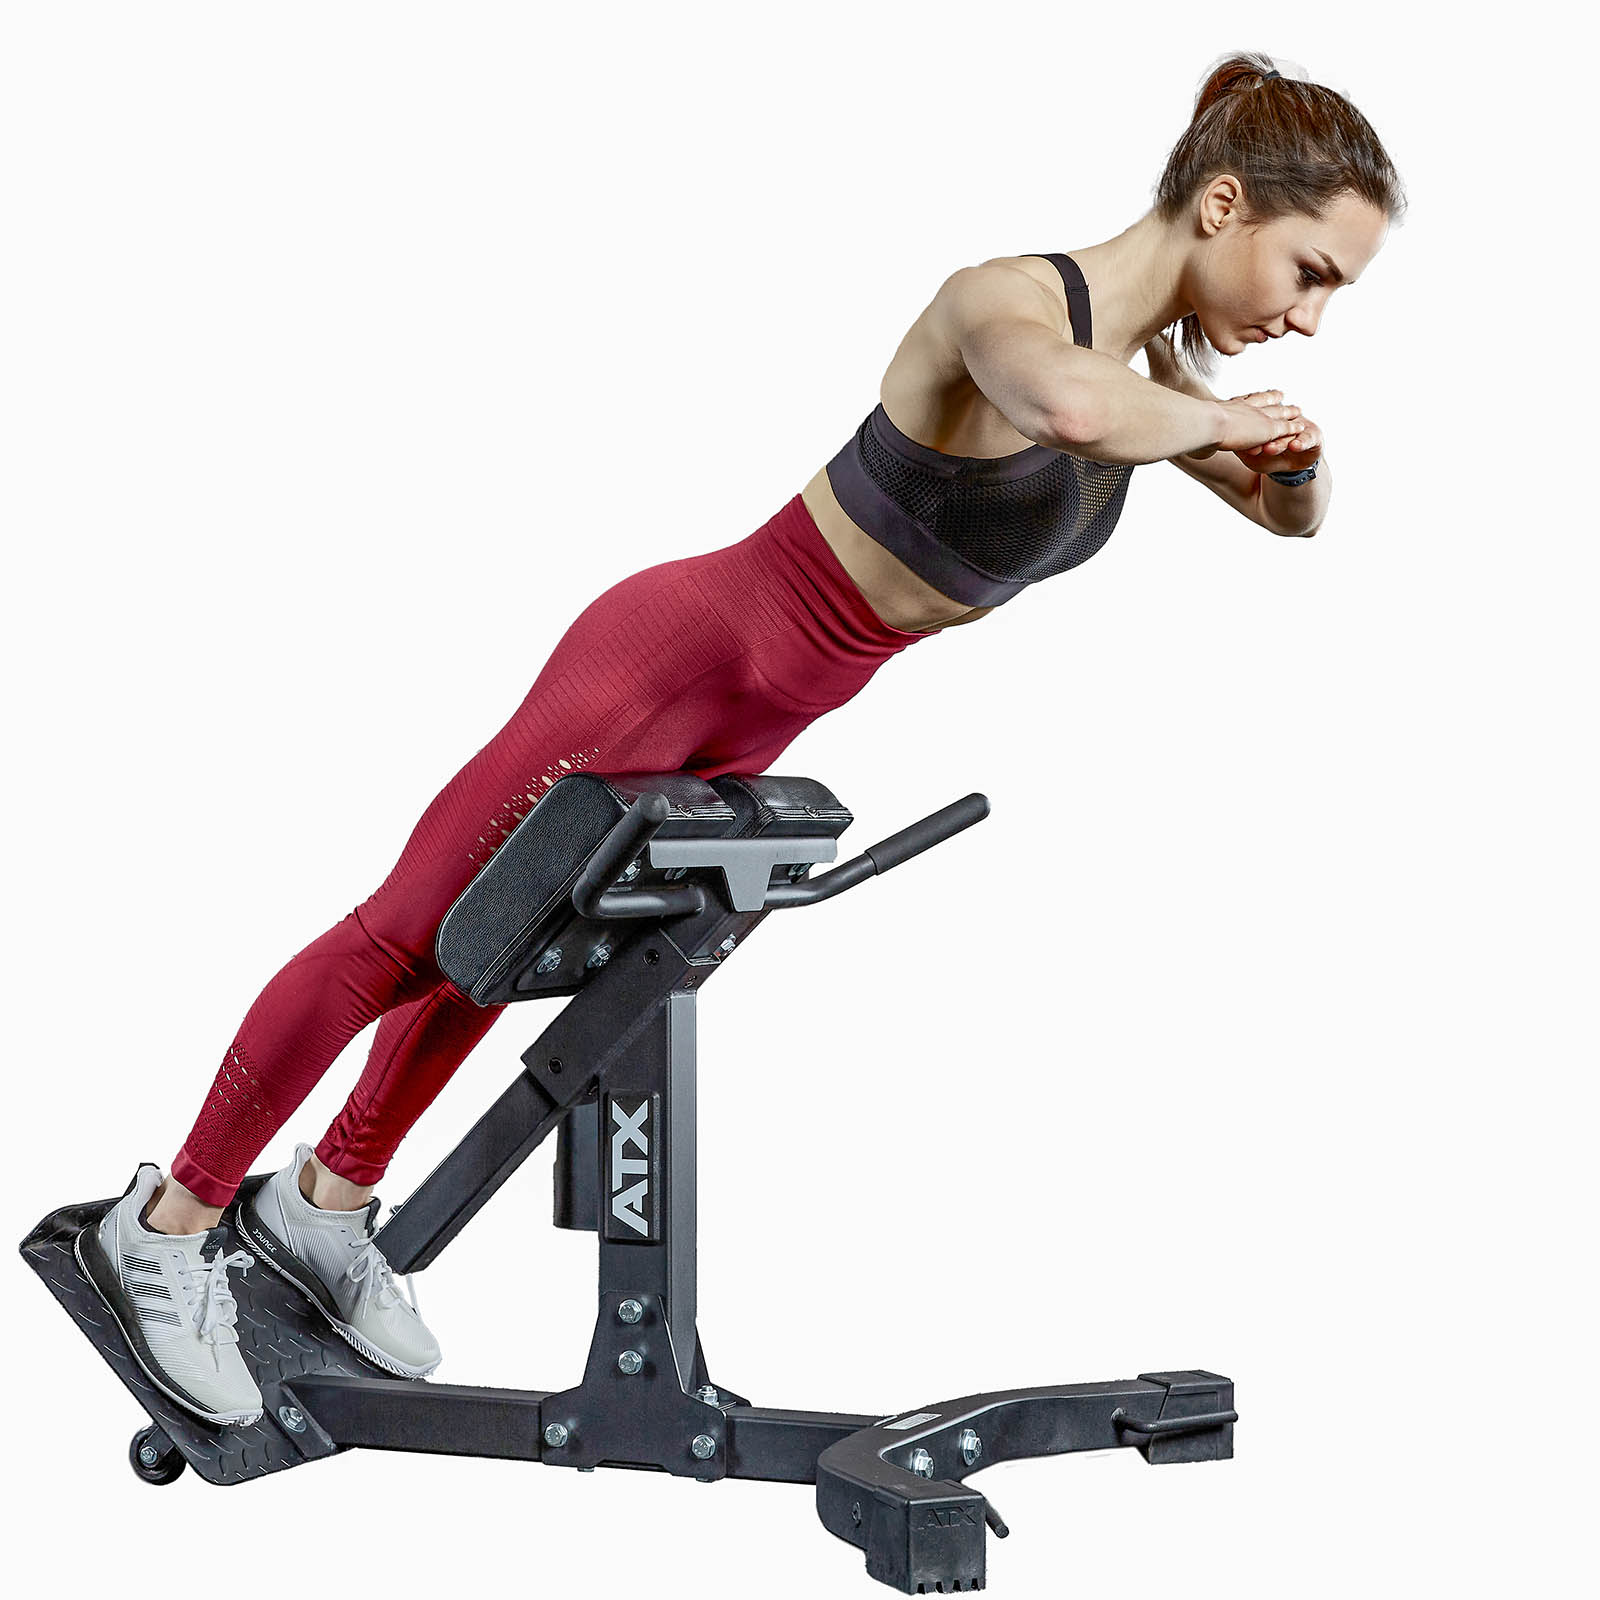 Buy Corefirst Resistance Pilates System - World's Best Portable